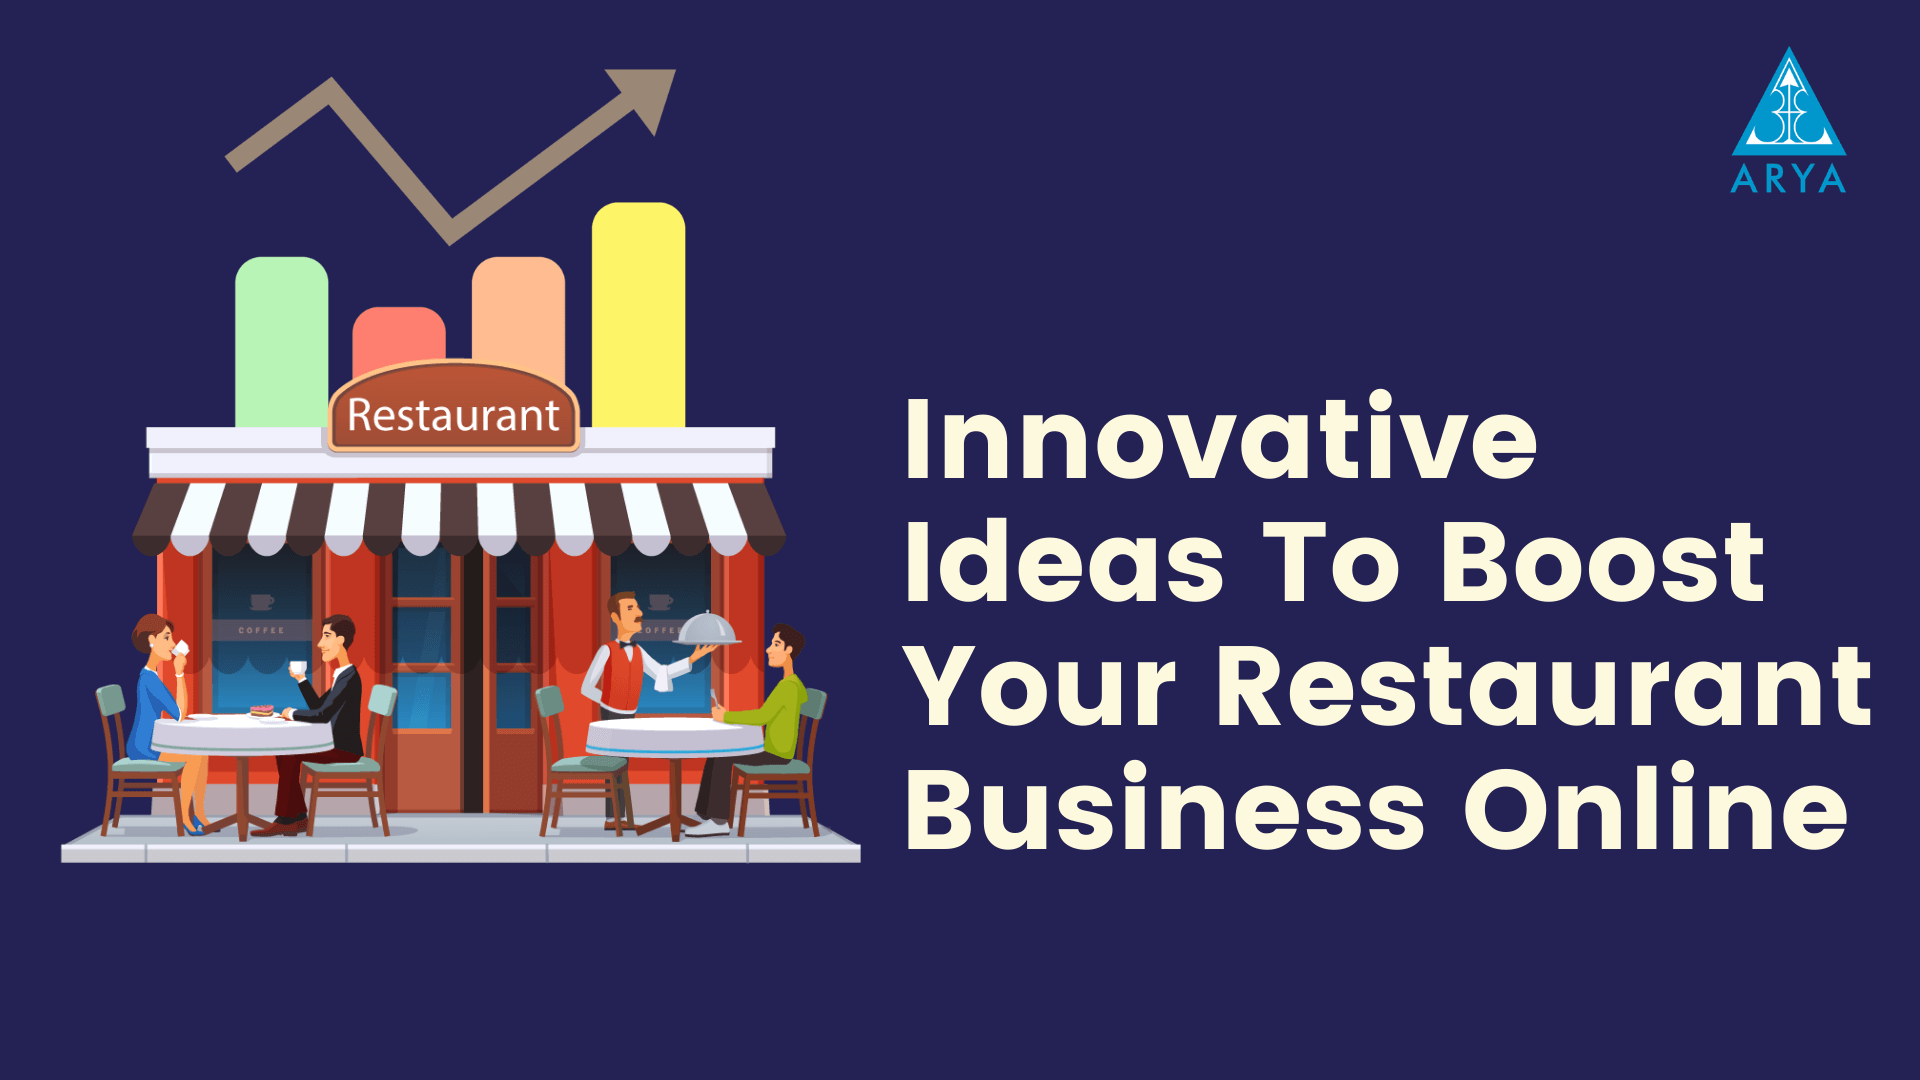 How We Can Innovate Ideas To Promote Our Restaurant Business Online?